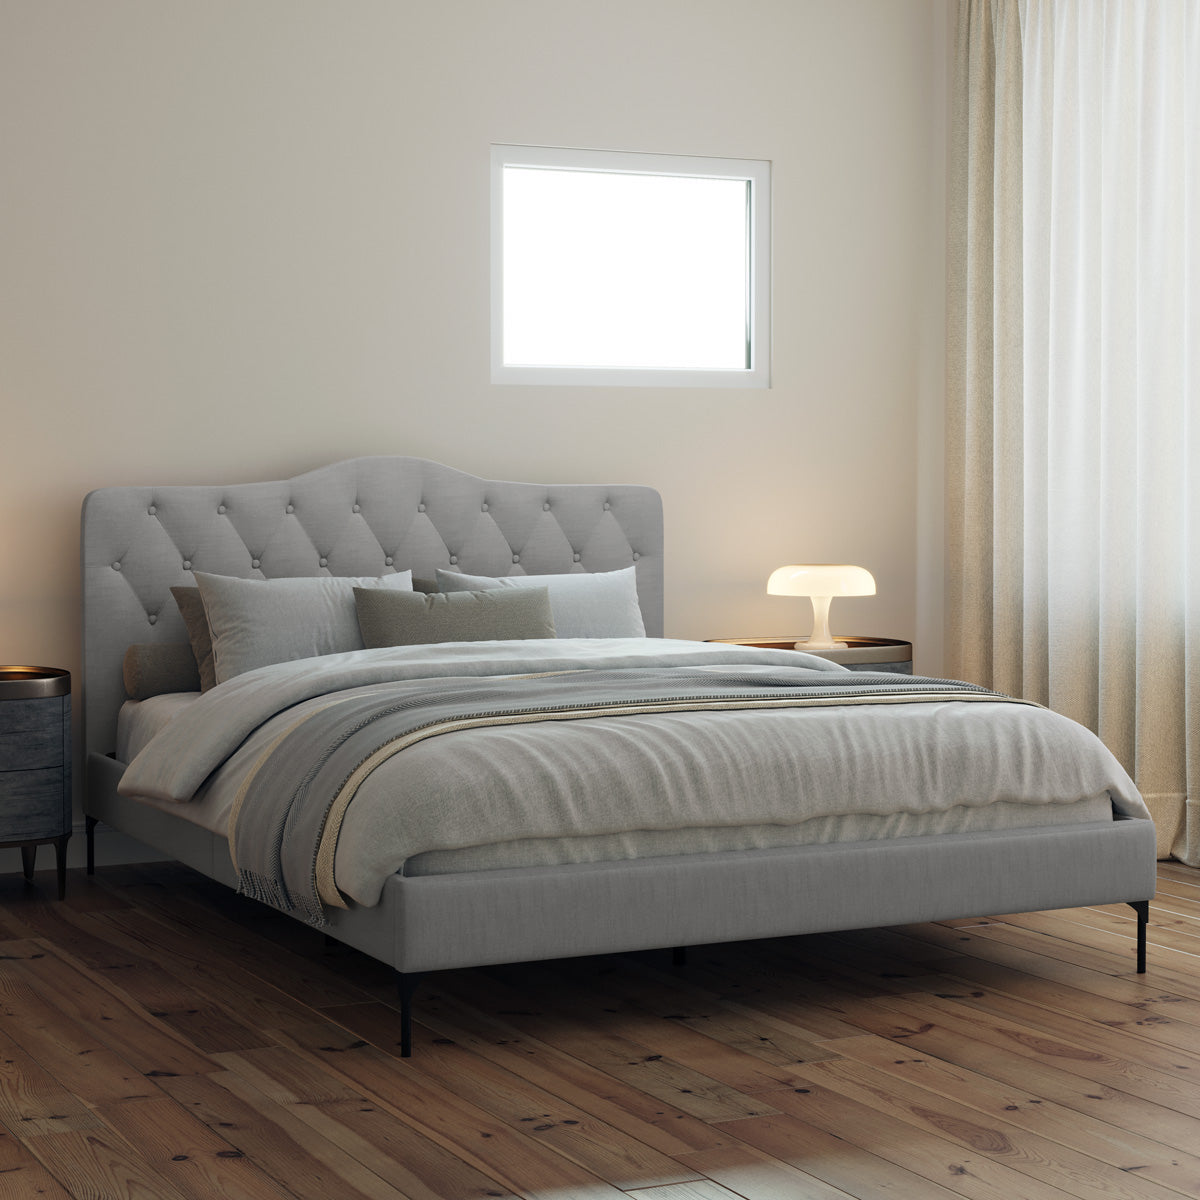 Dawn Upholstered Fabric Bed Frame (Grey)